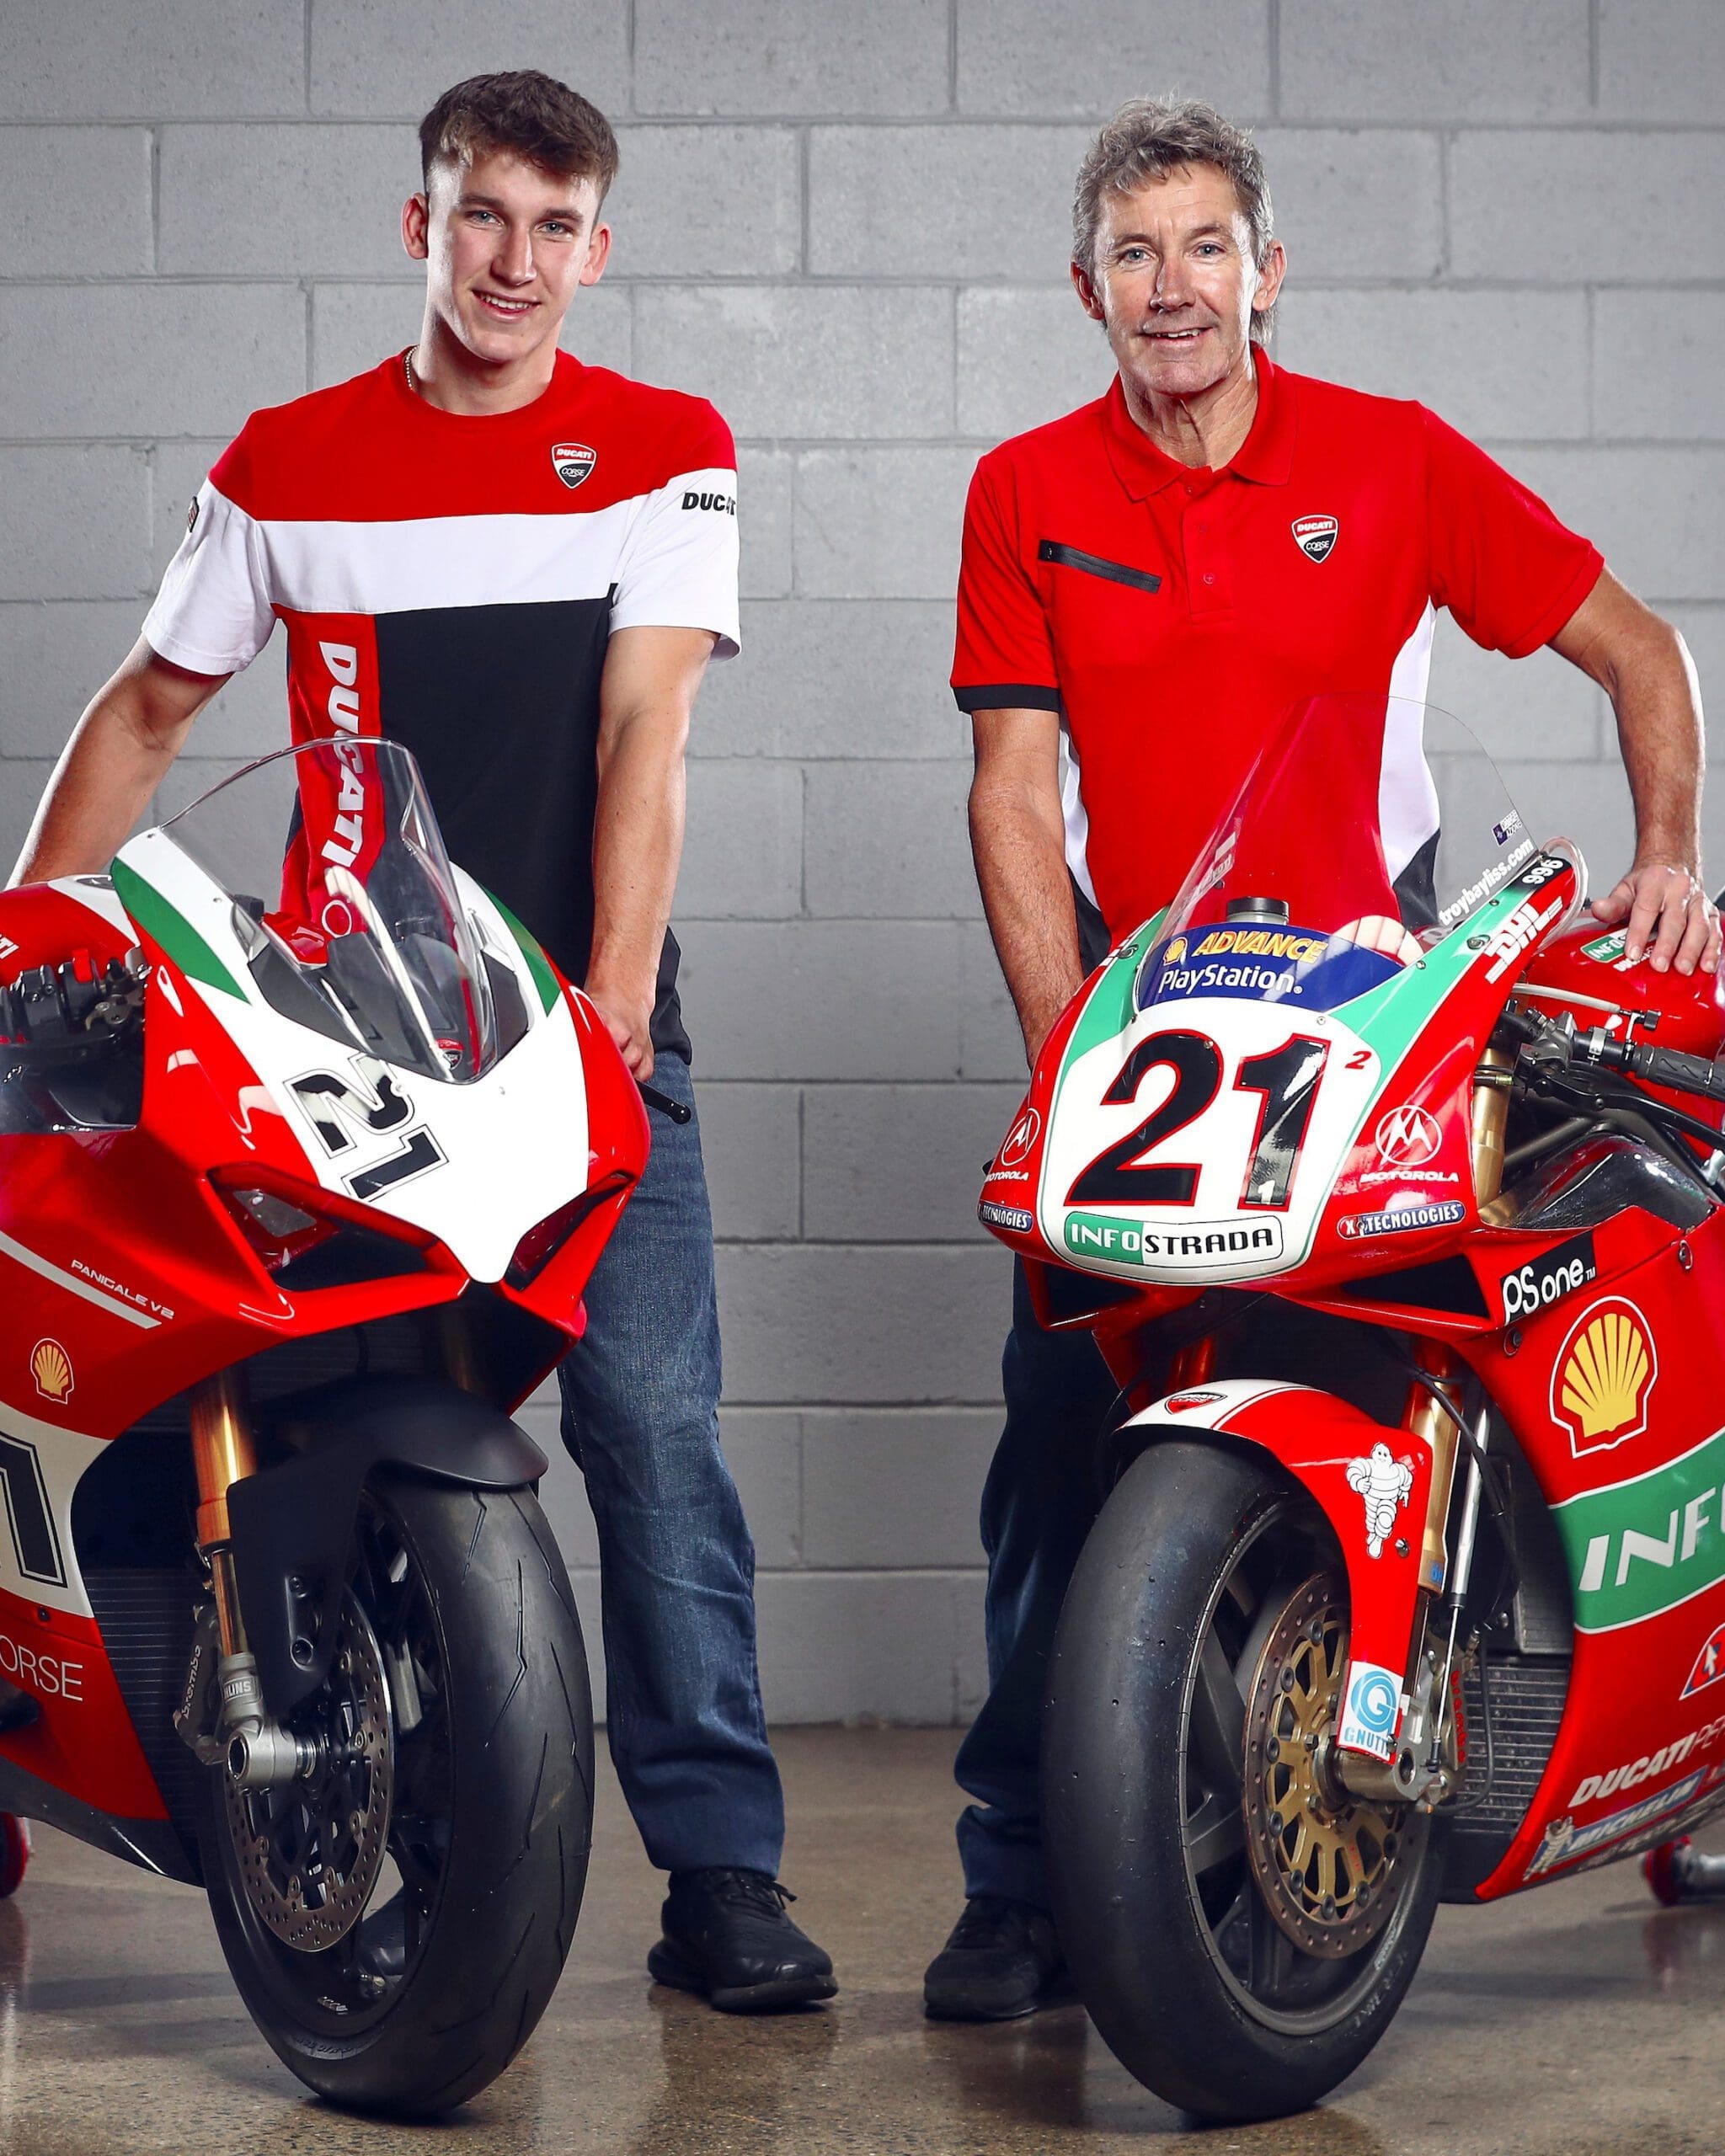 Bayliss is back with Ducati!